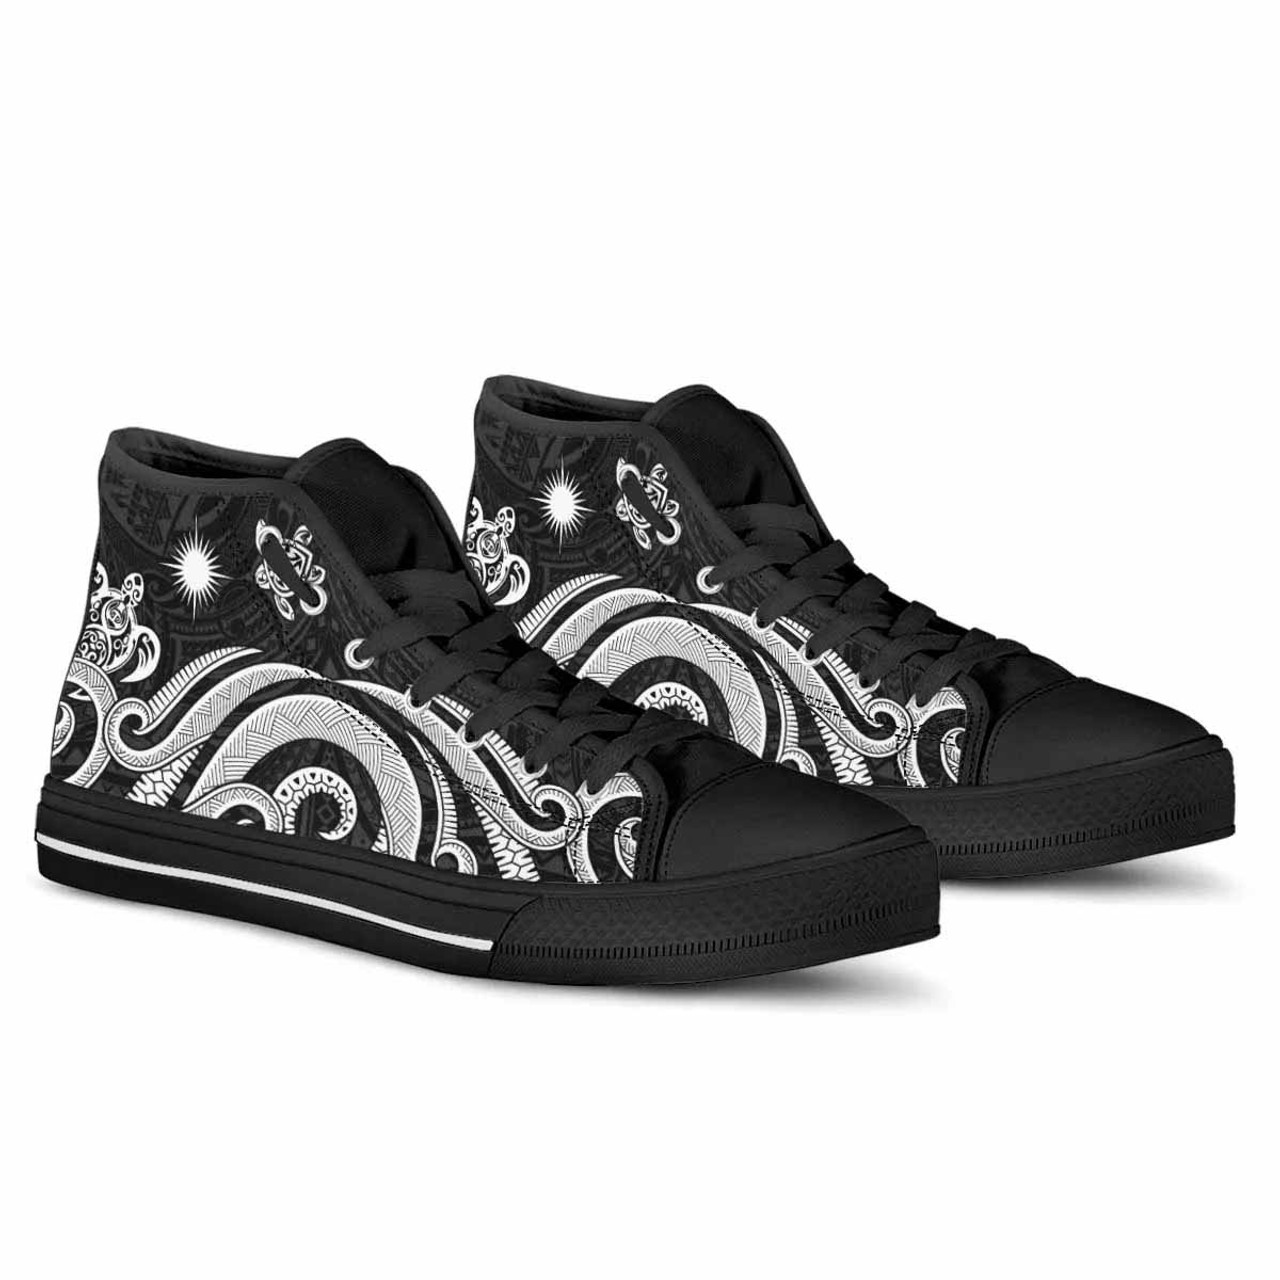 Marshall Islands High Top Shoes - White Tentacle Turtle 4